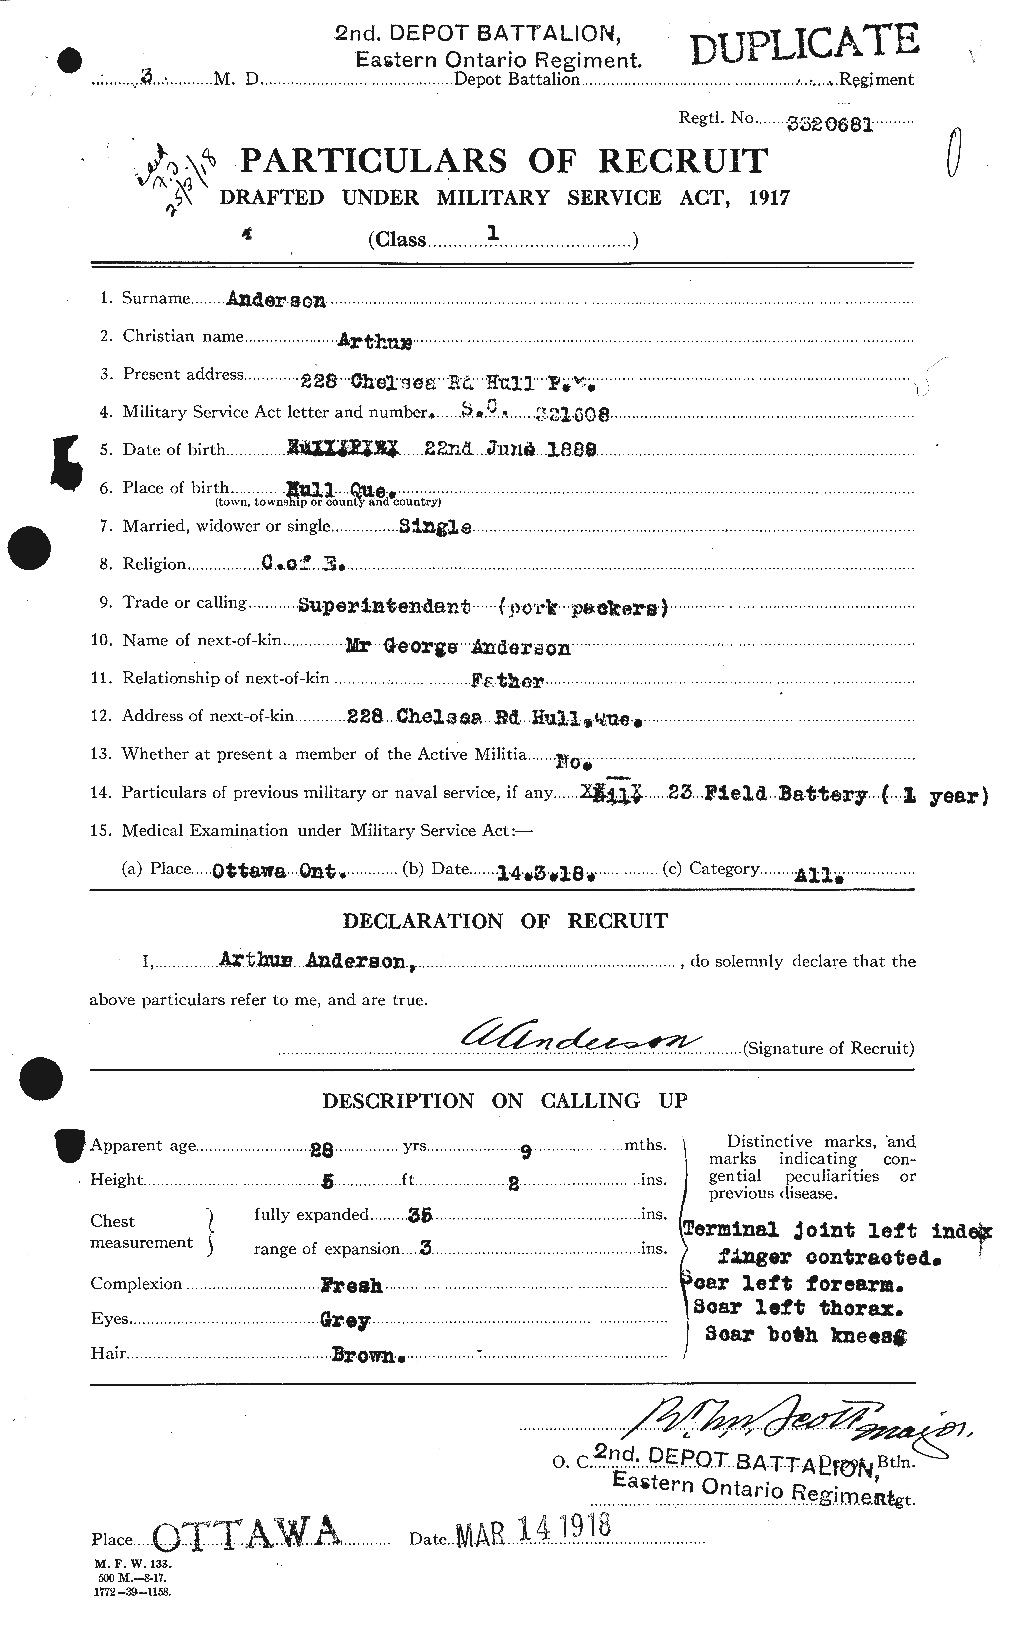 Personnel Records of the First World War - CEF 209367a